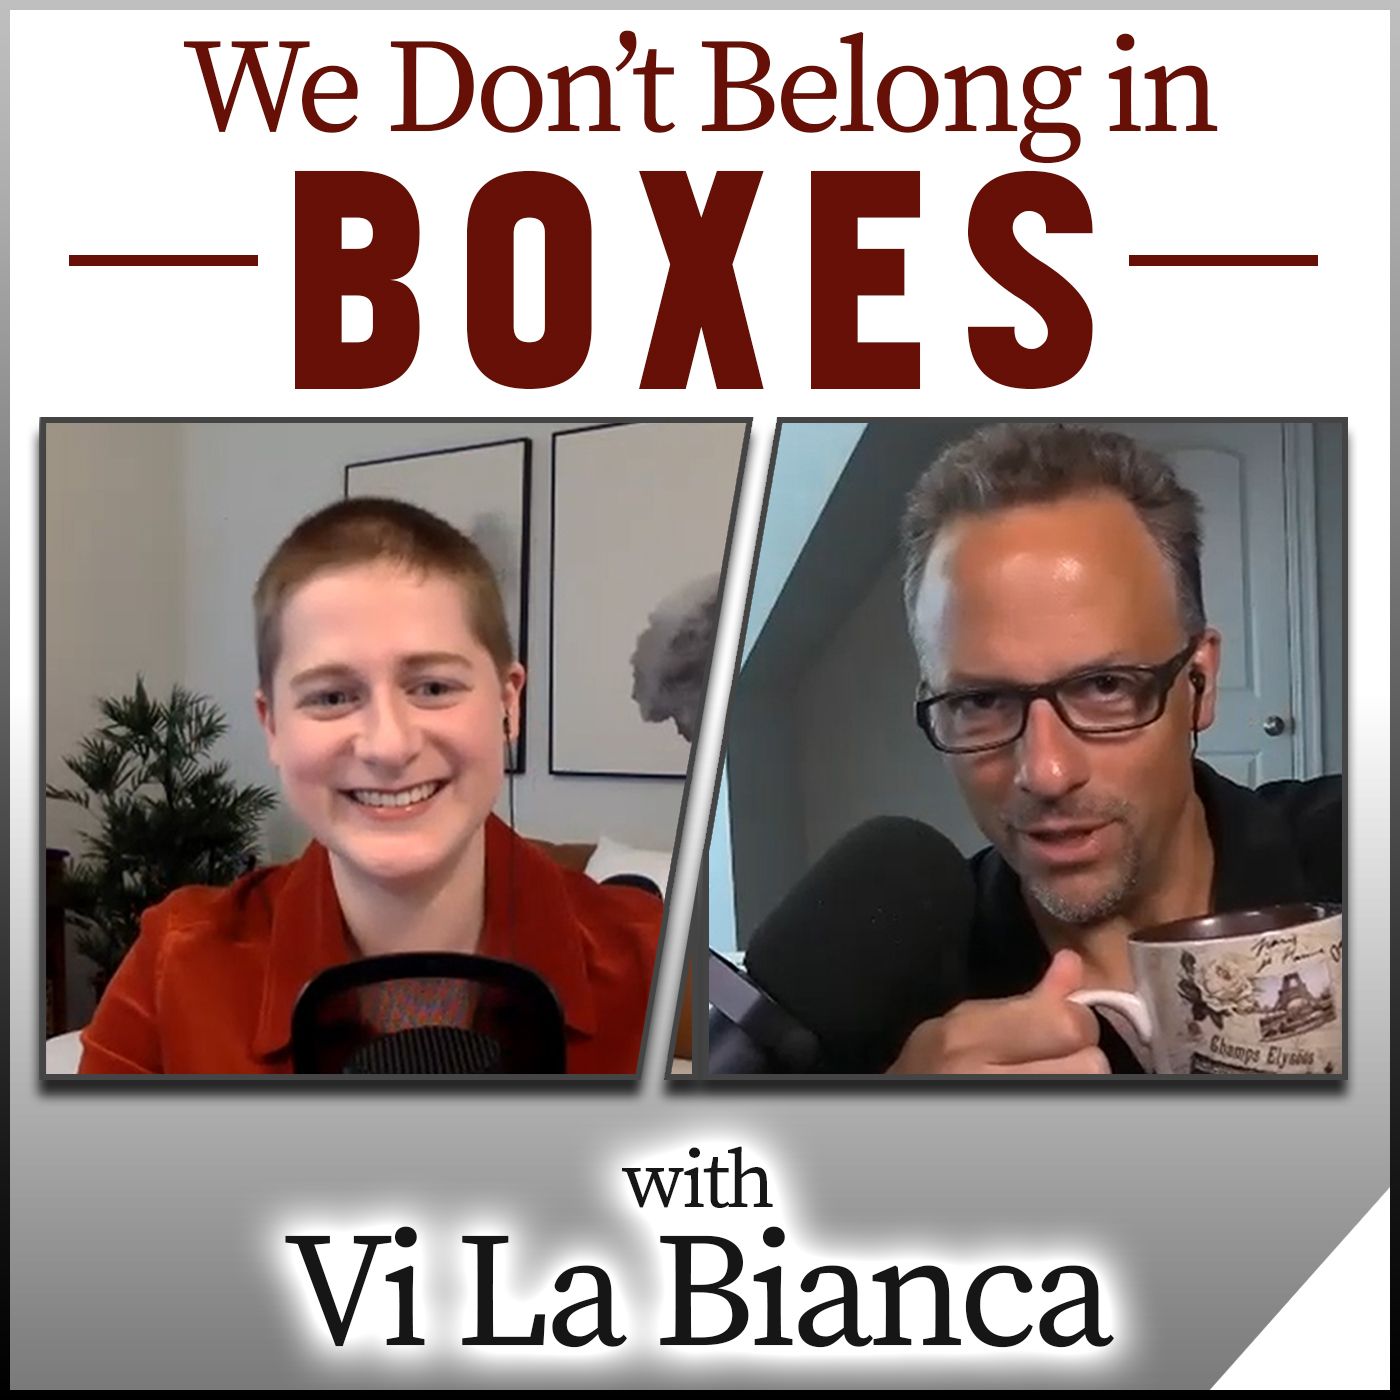 We Don’t Belong in Boxes (with Vi La Bianca)